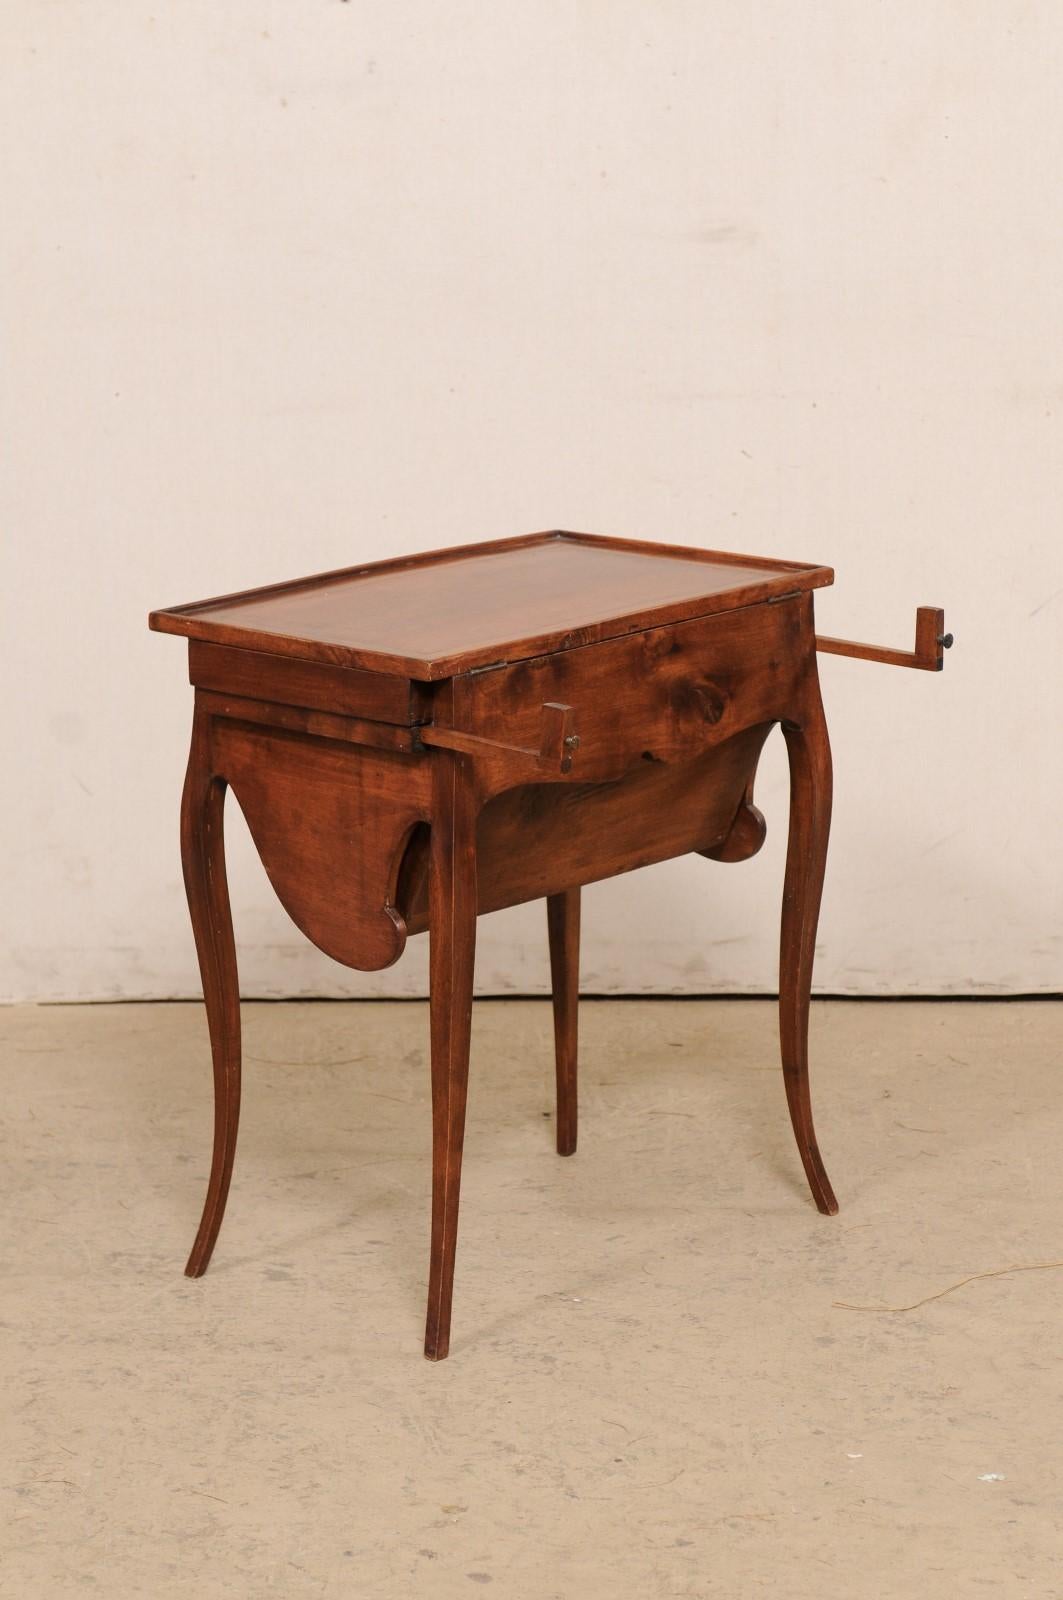 French 19th C. Table w/ Unusual & Creative Drop Down Storage-Great for Crafting 2